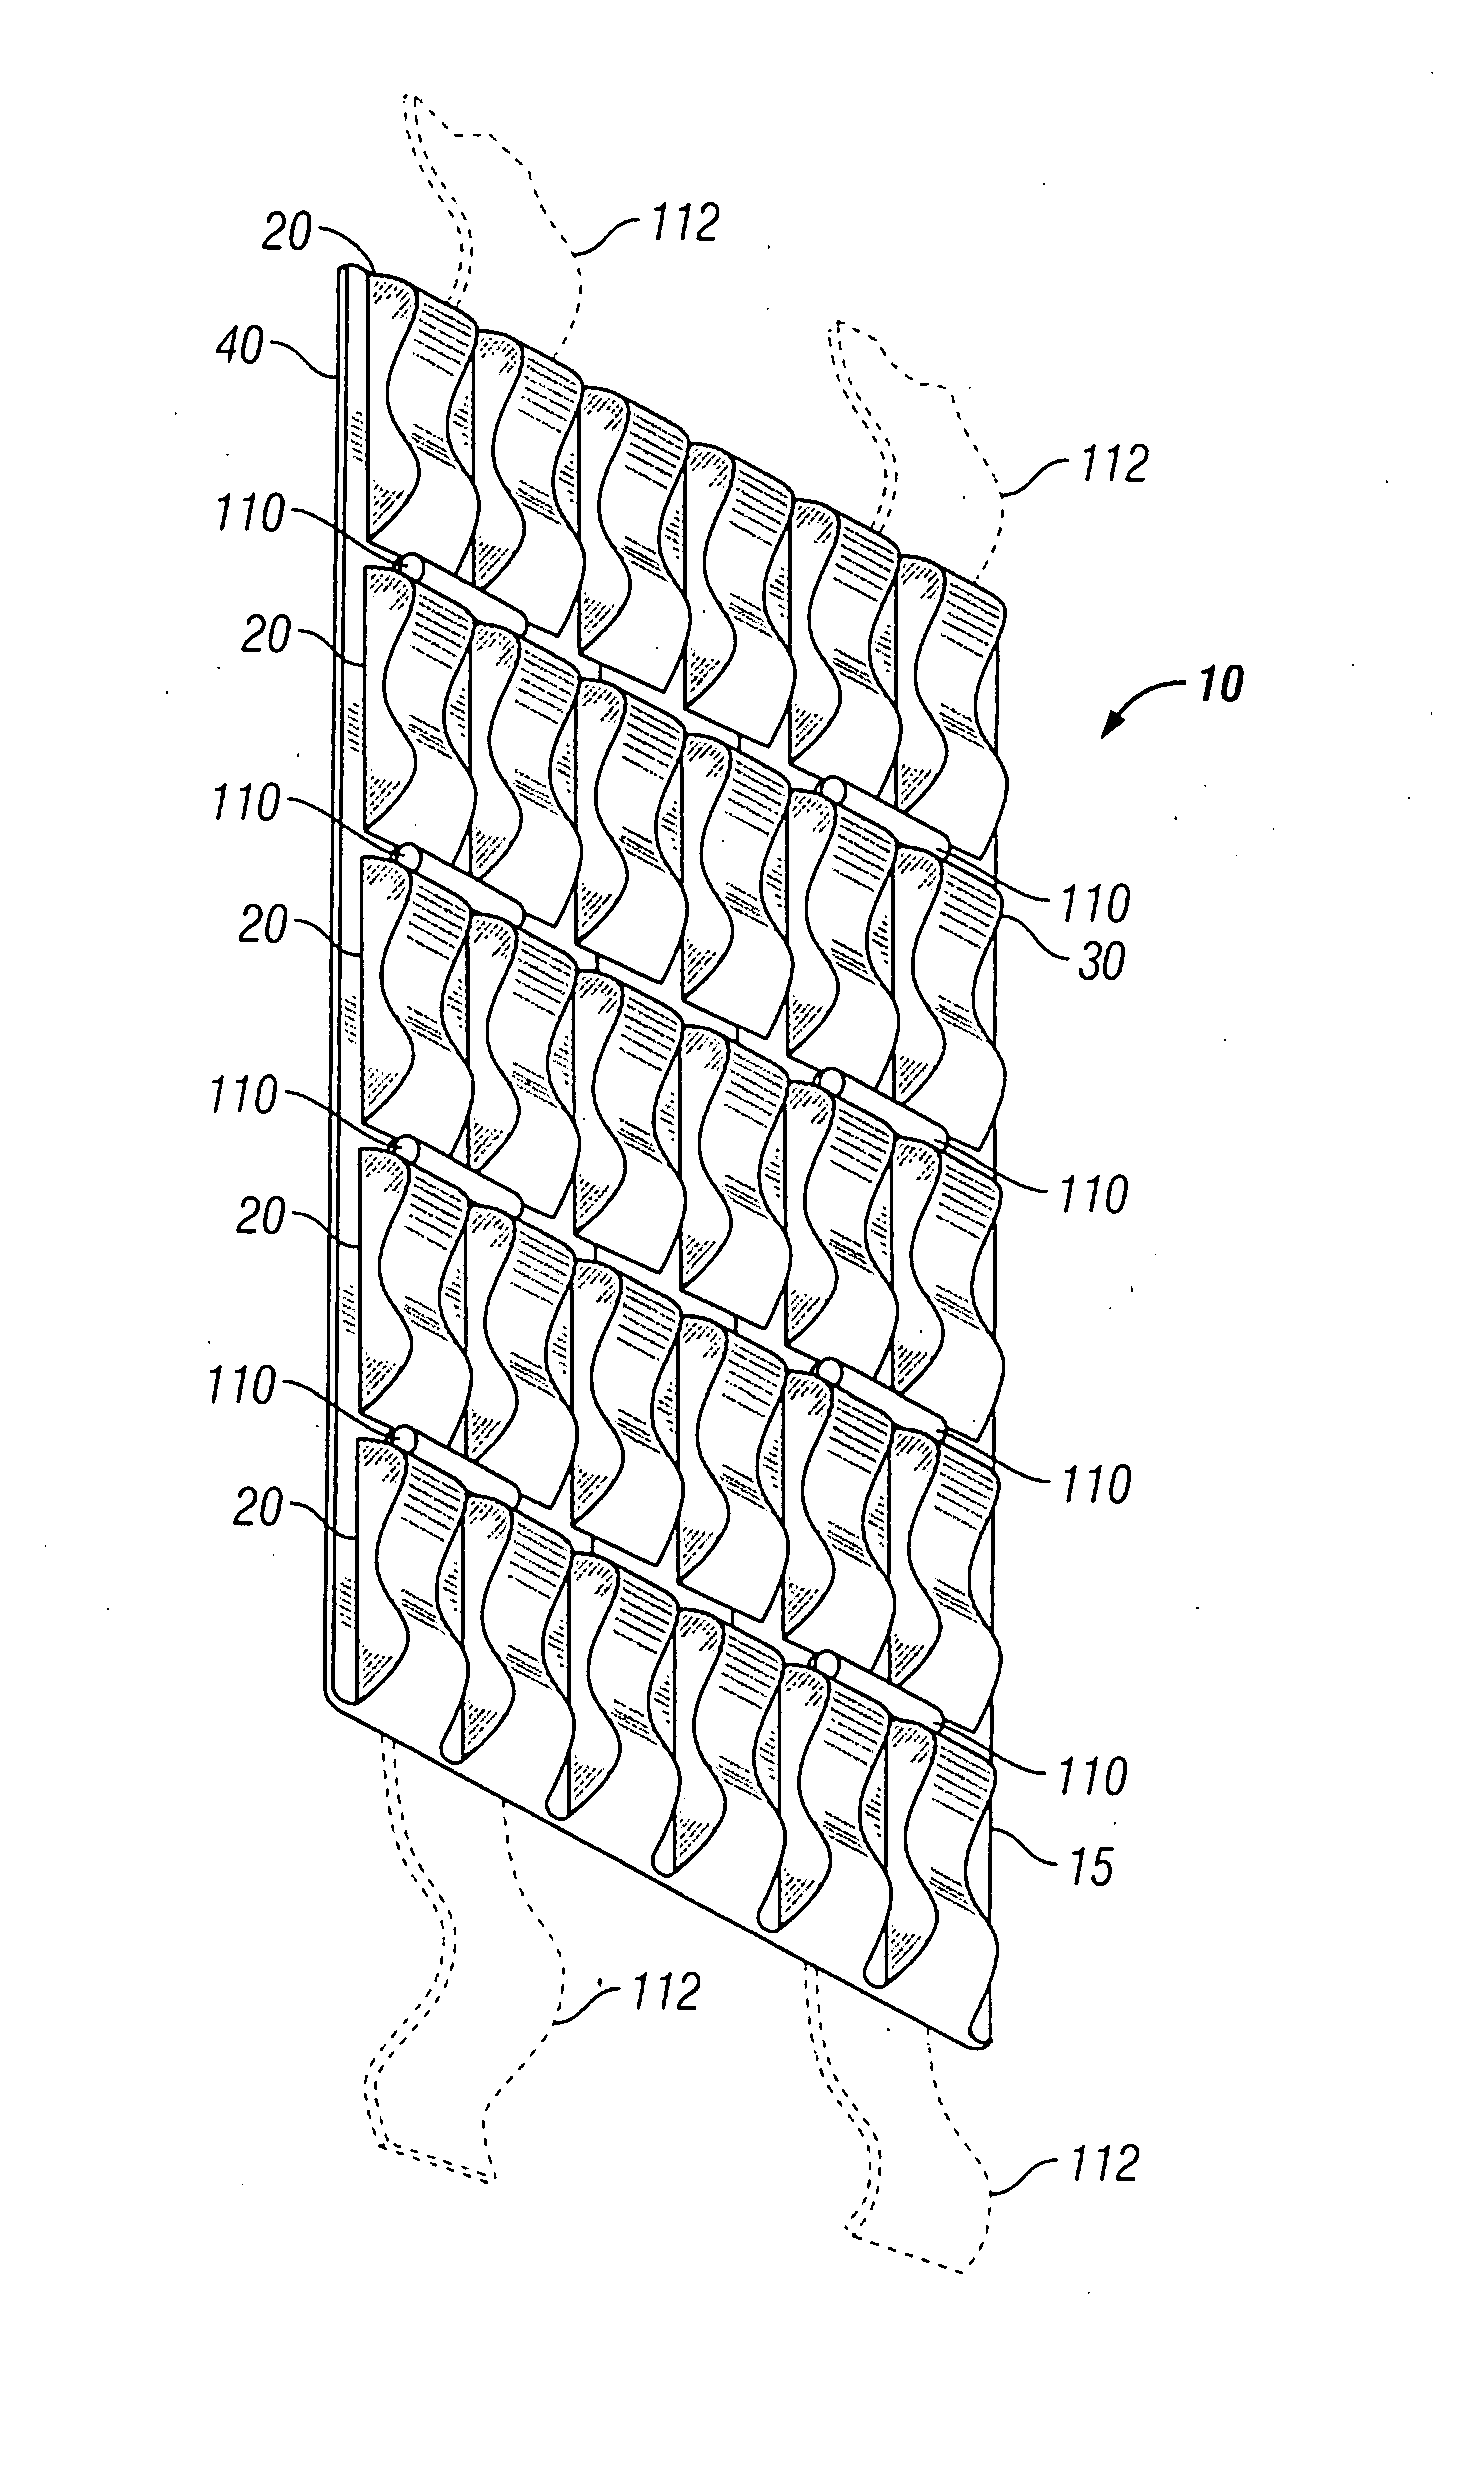 Therapeutic treatment apparatus and method